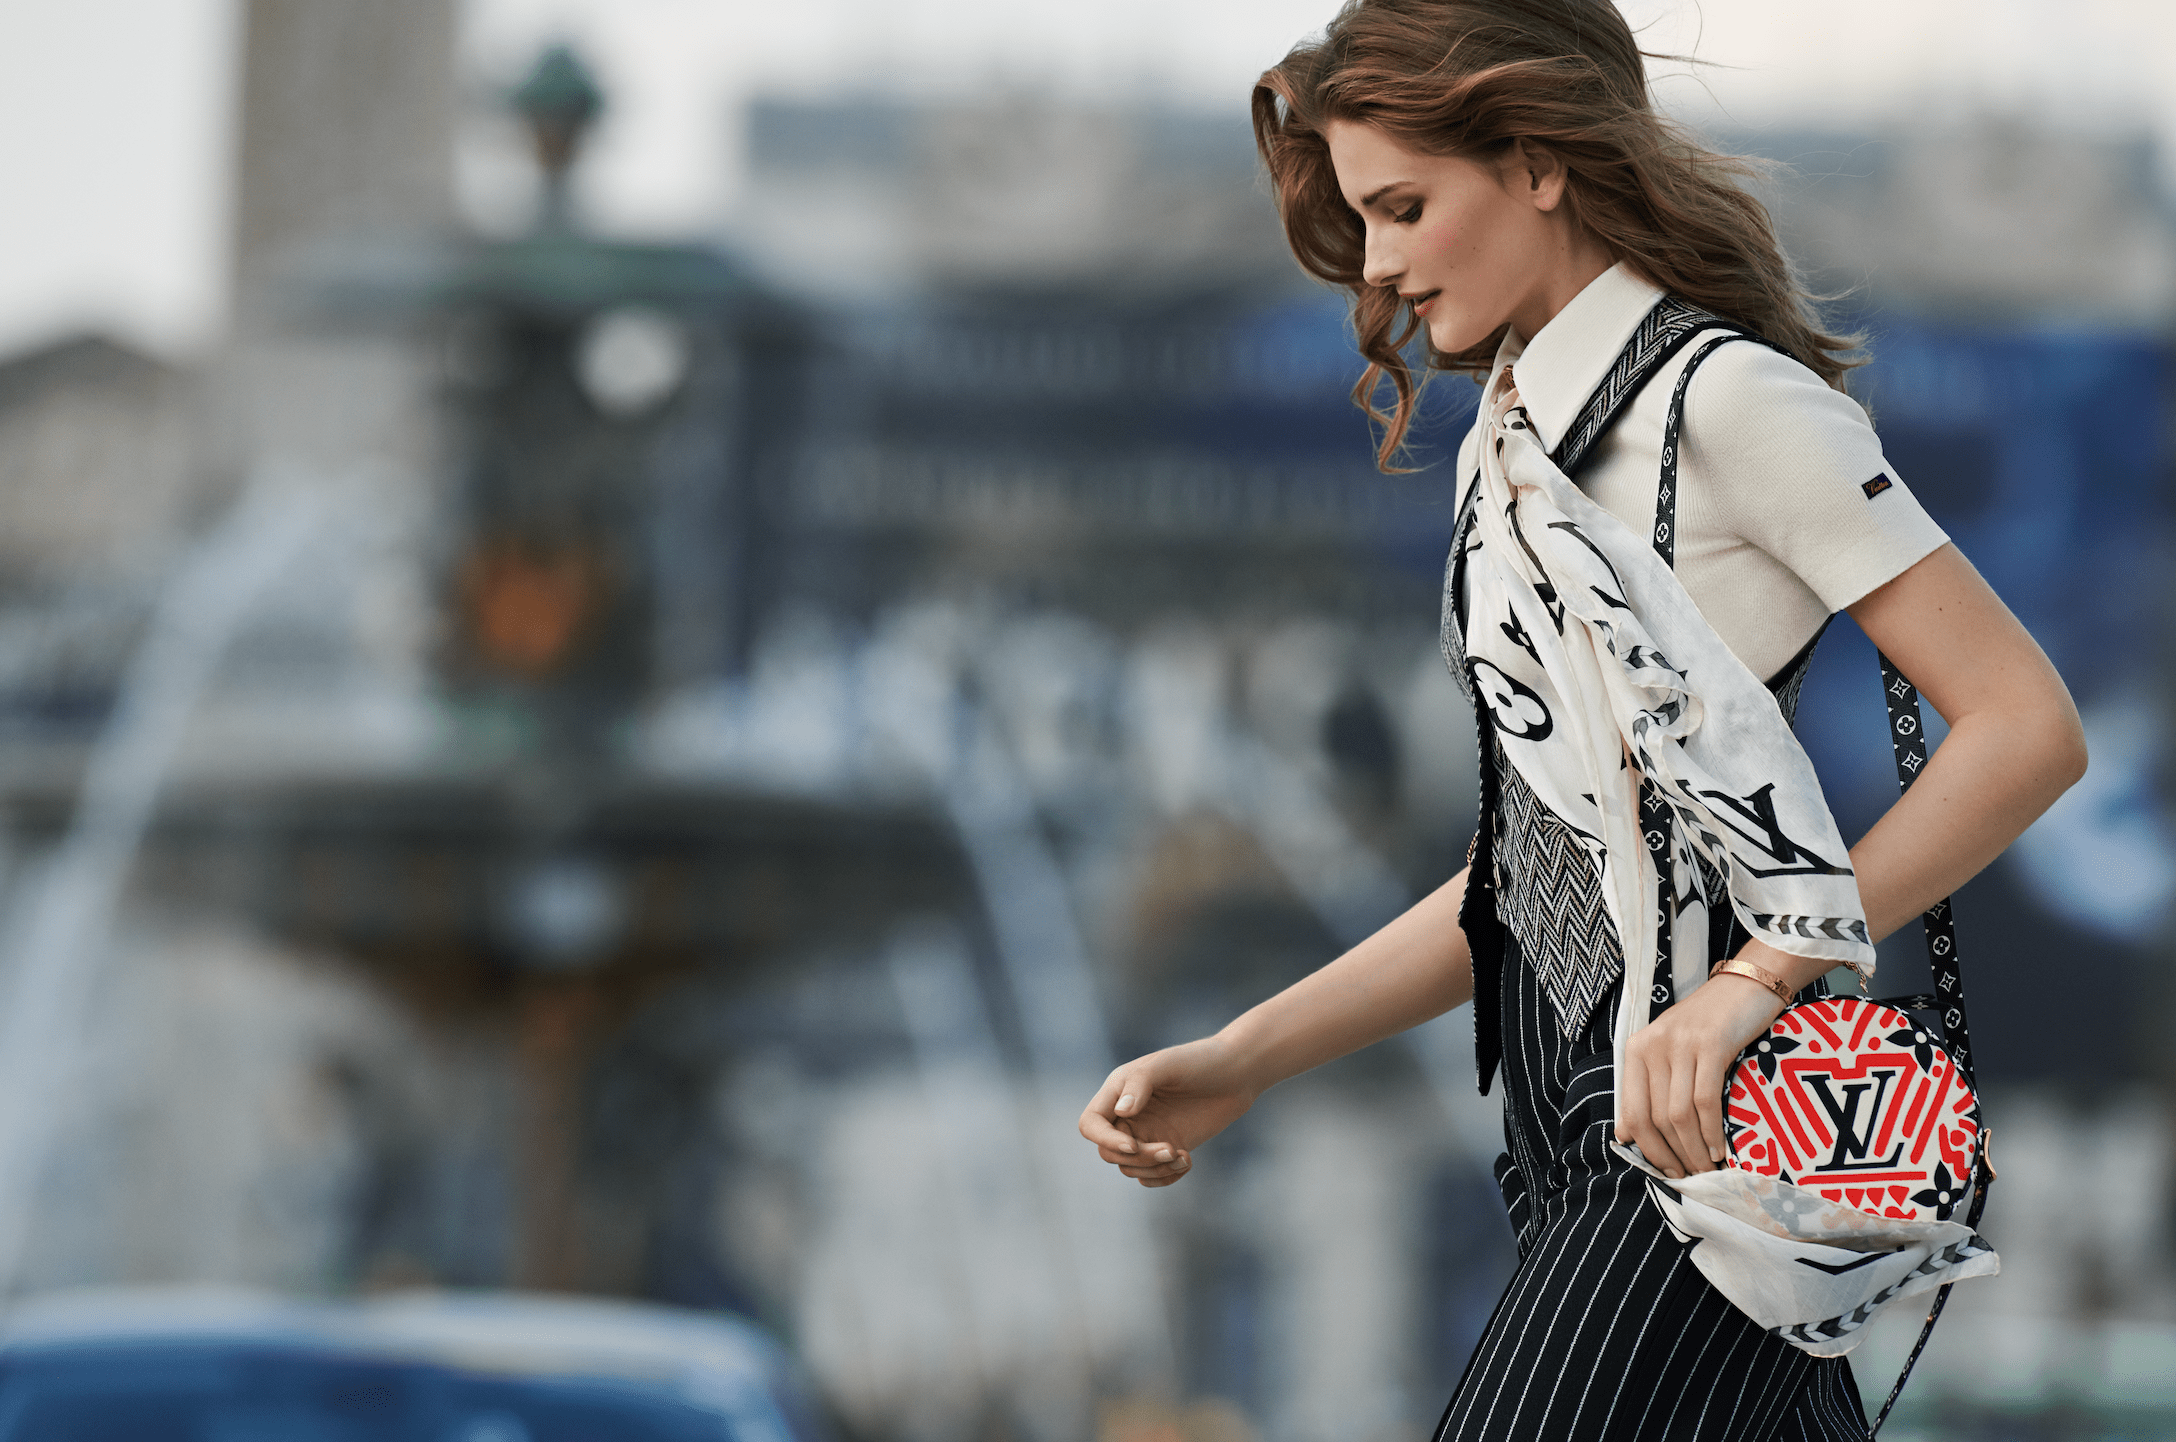 Why We Just Can't Get Enough Of The New LV Crafty Collection